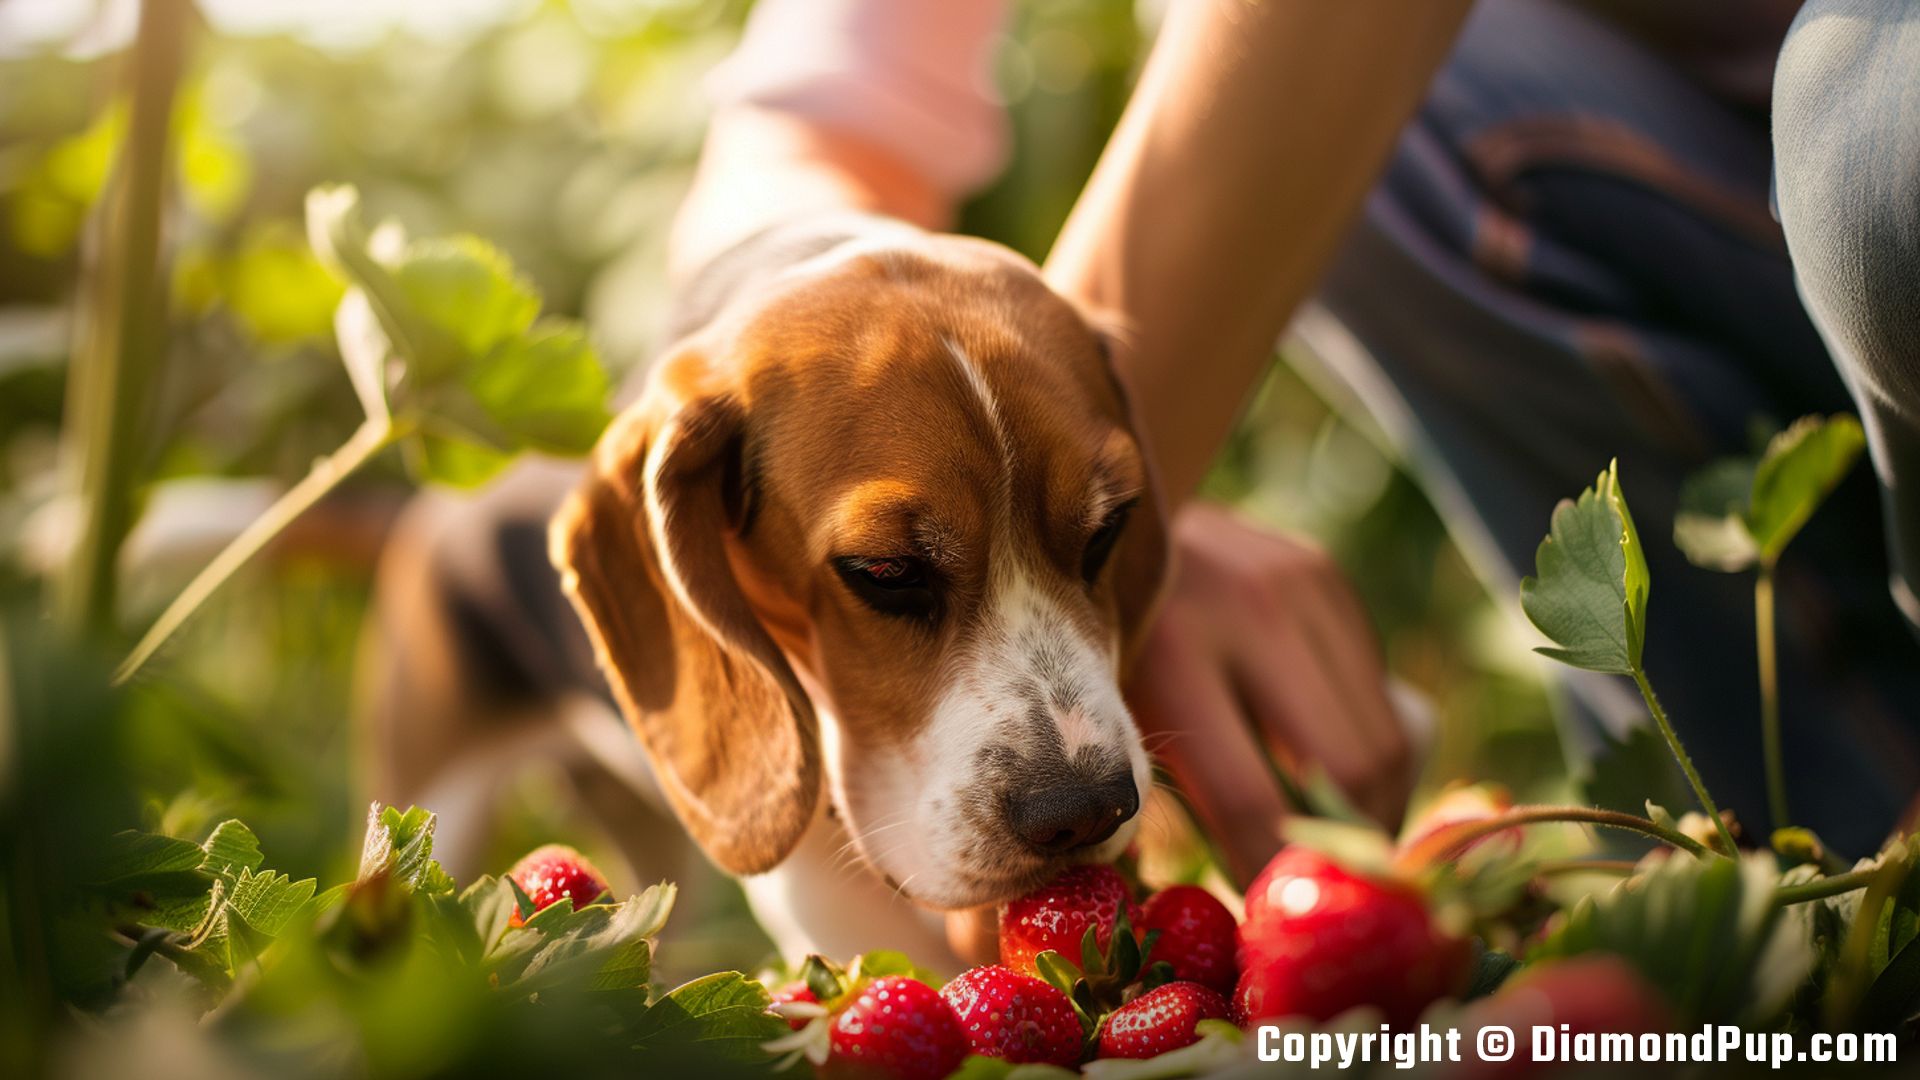 Photo of a Playful Beagle Eating Strawberries